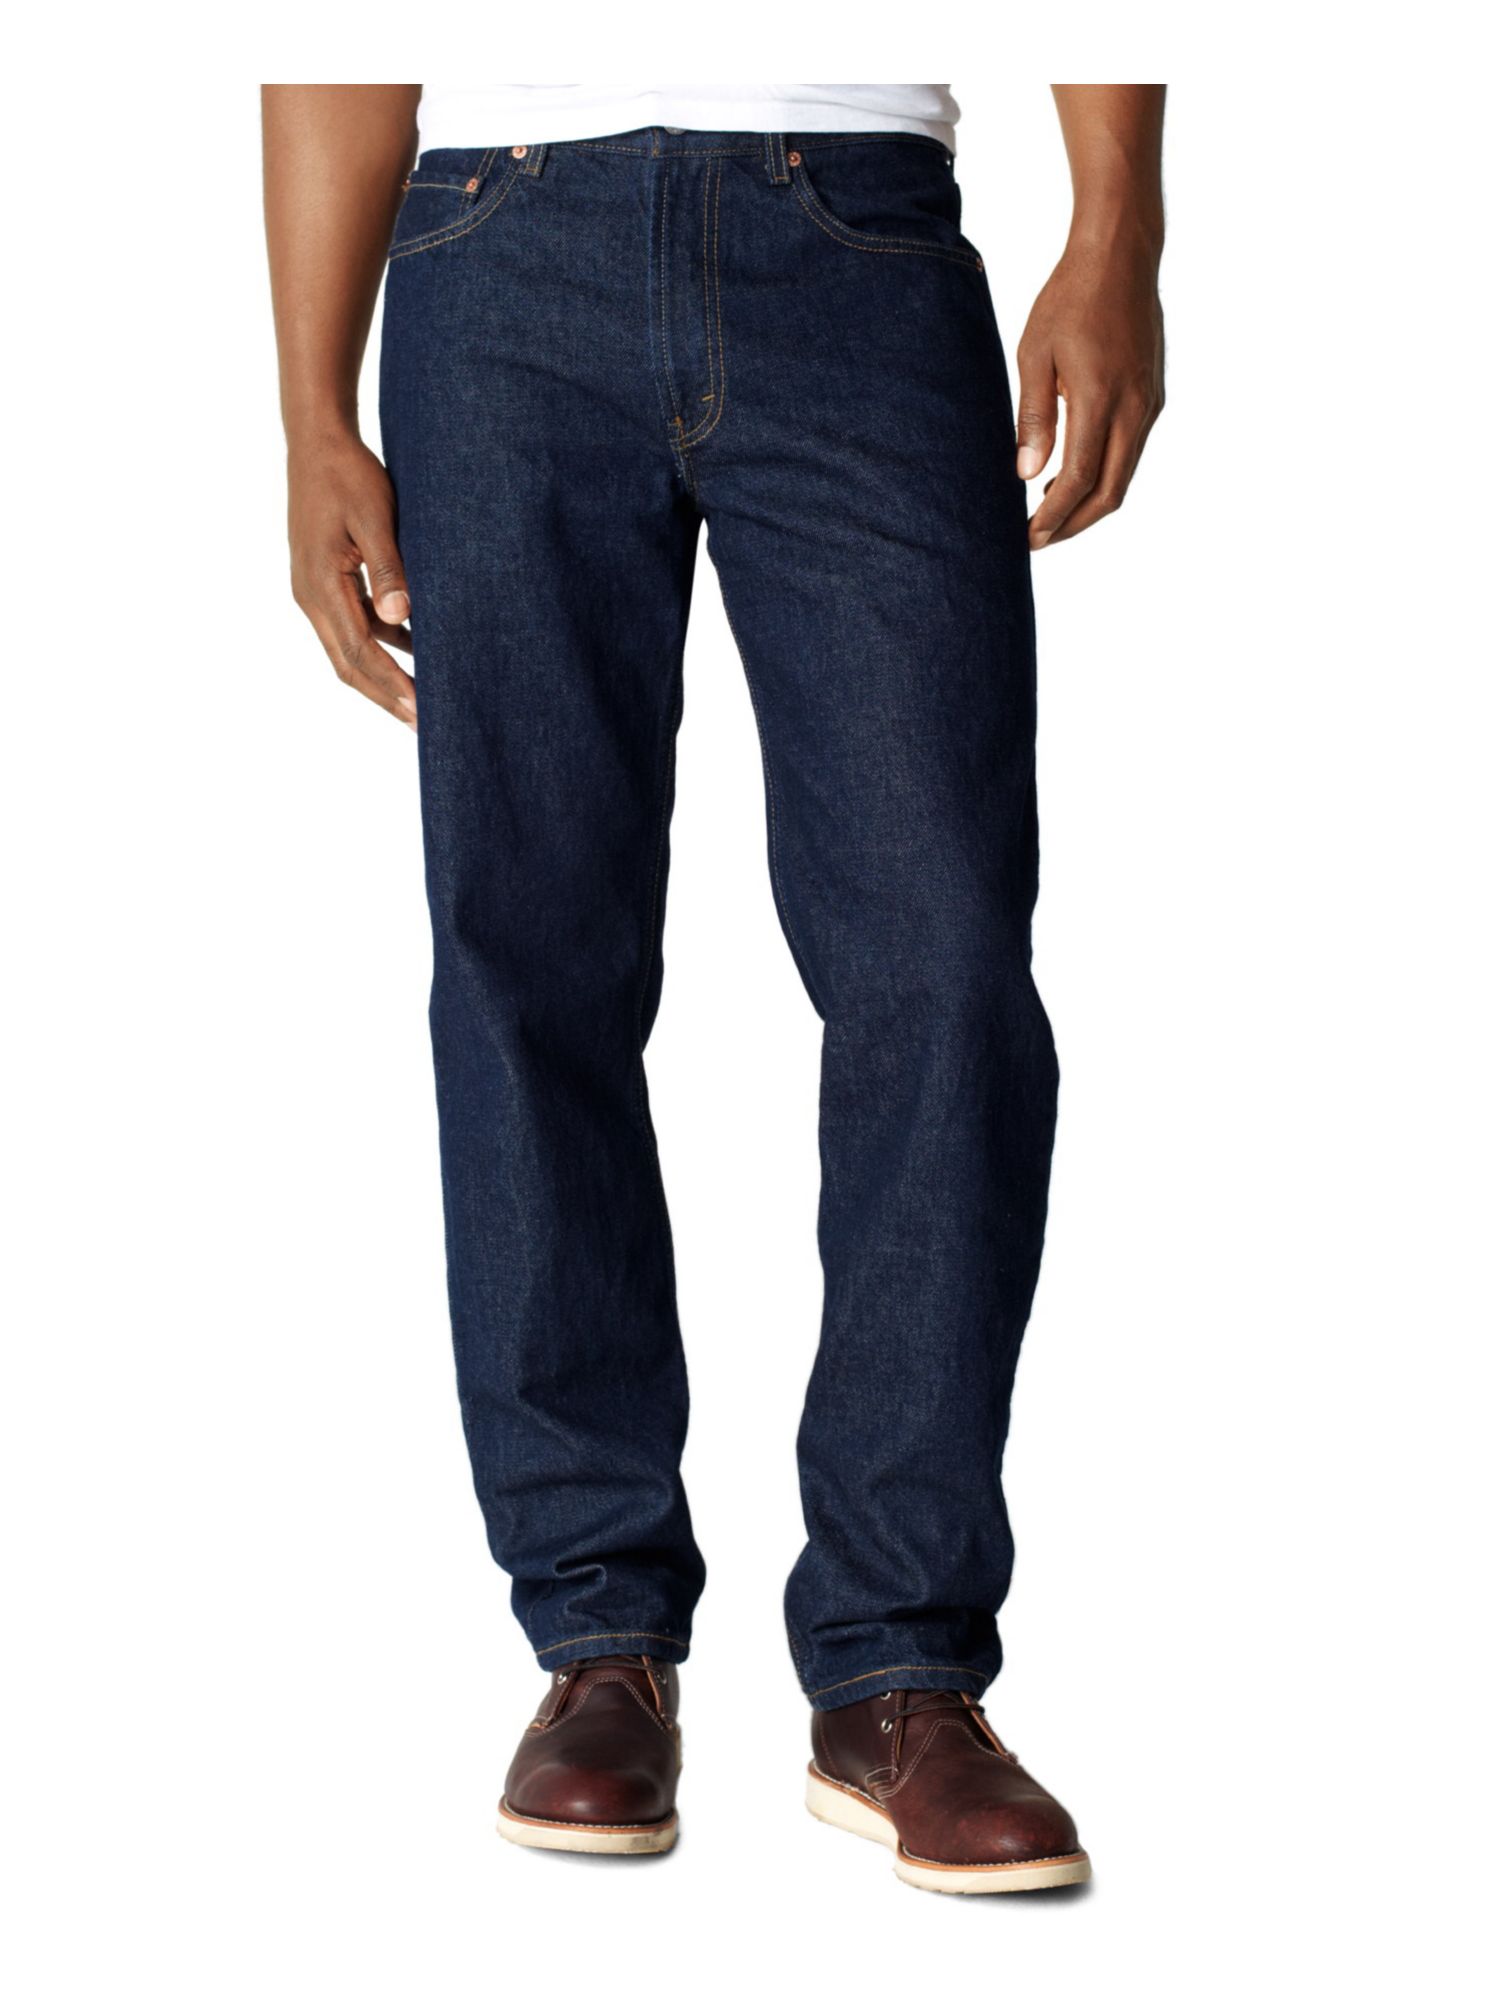 LEVI'S Mens Blue Tapered, Relaxed Fit Denim Jeans 60x32